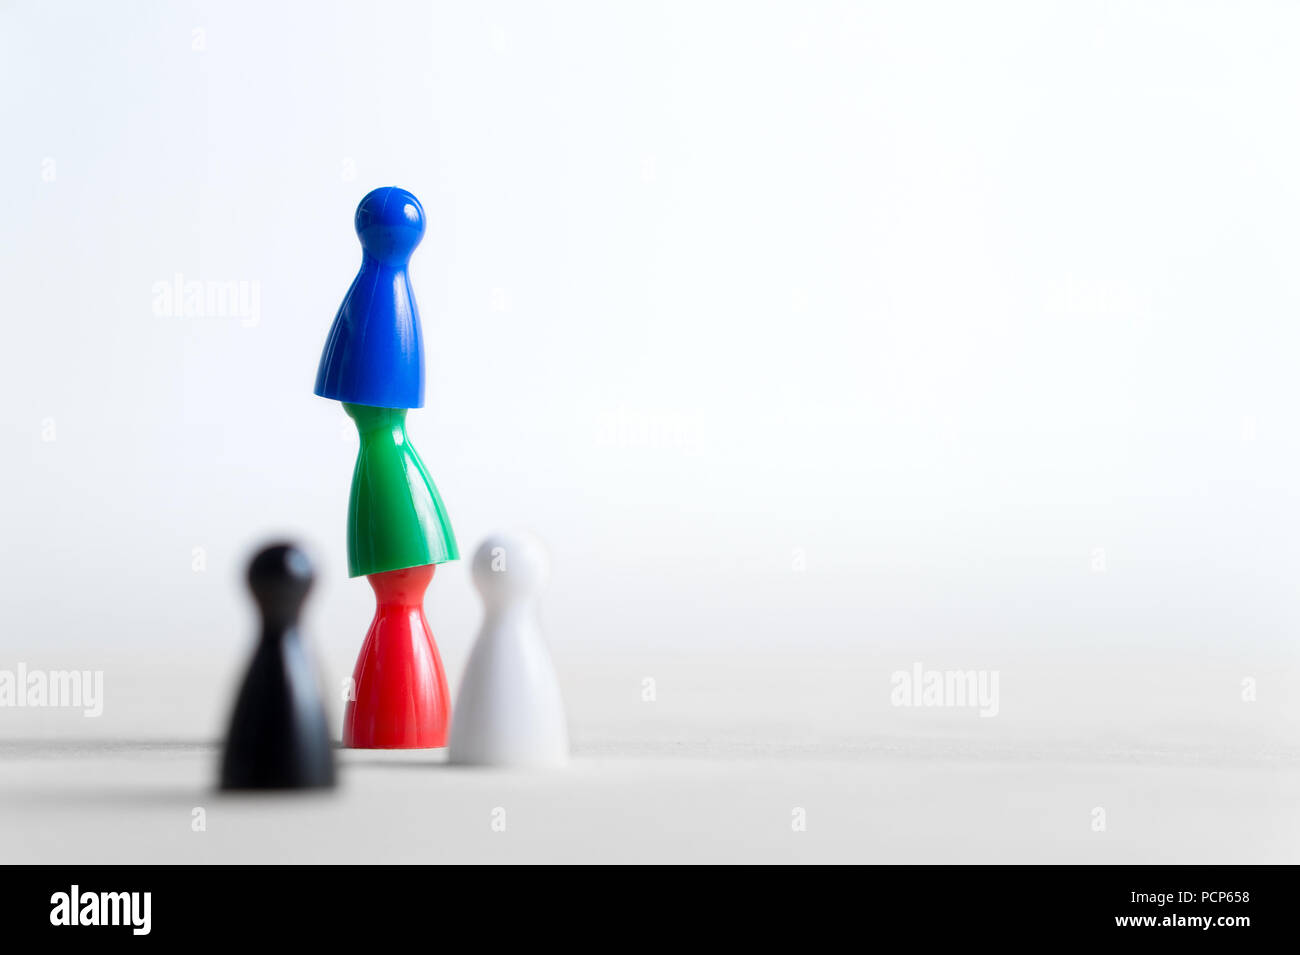 Teamwork, reaching goals, working together and success concept. Cooperation, leadership, achievement and support. Colorful board game pawns. Stock Photo